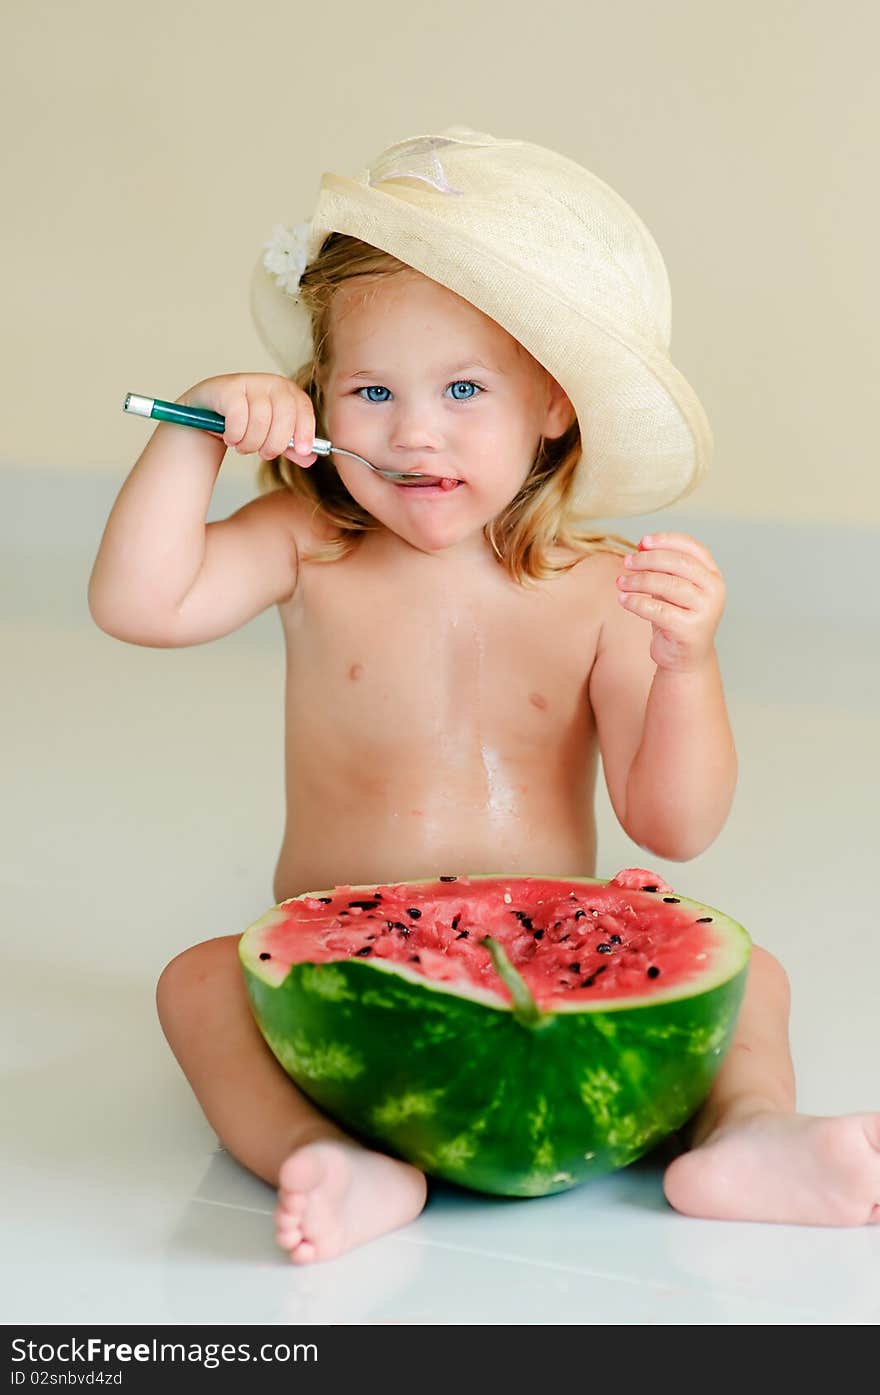 Funny girl eating with appetite ripe watermelon. Funny girl eating with appetite ripe watermelon